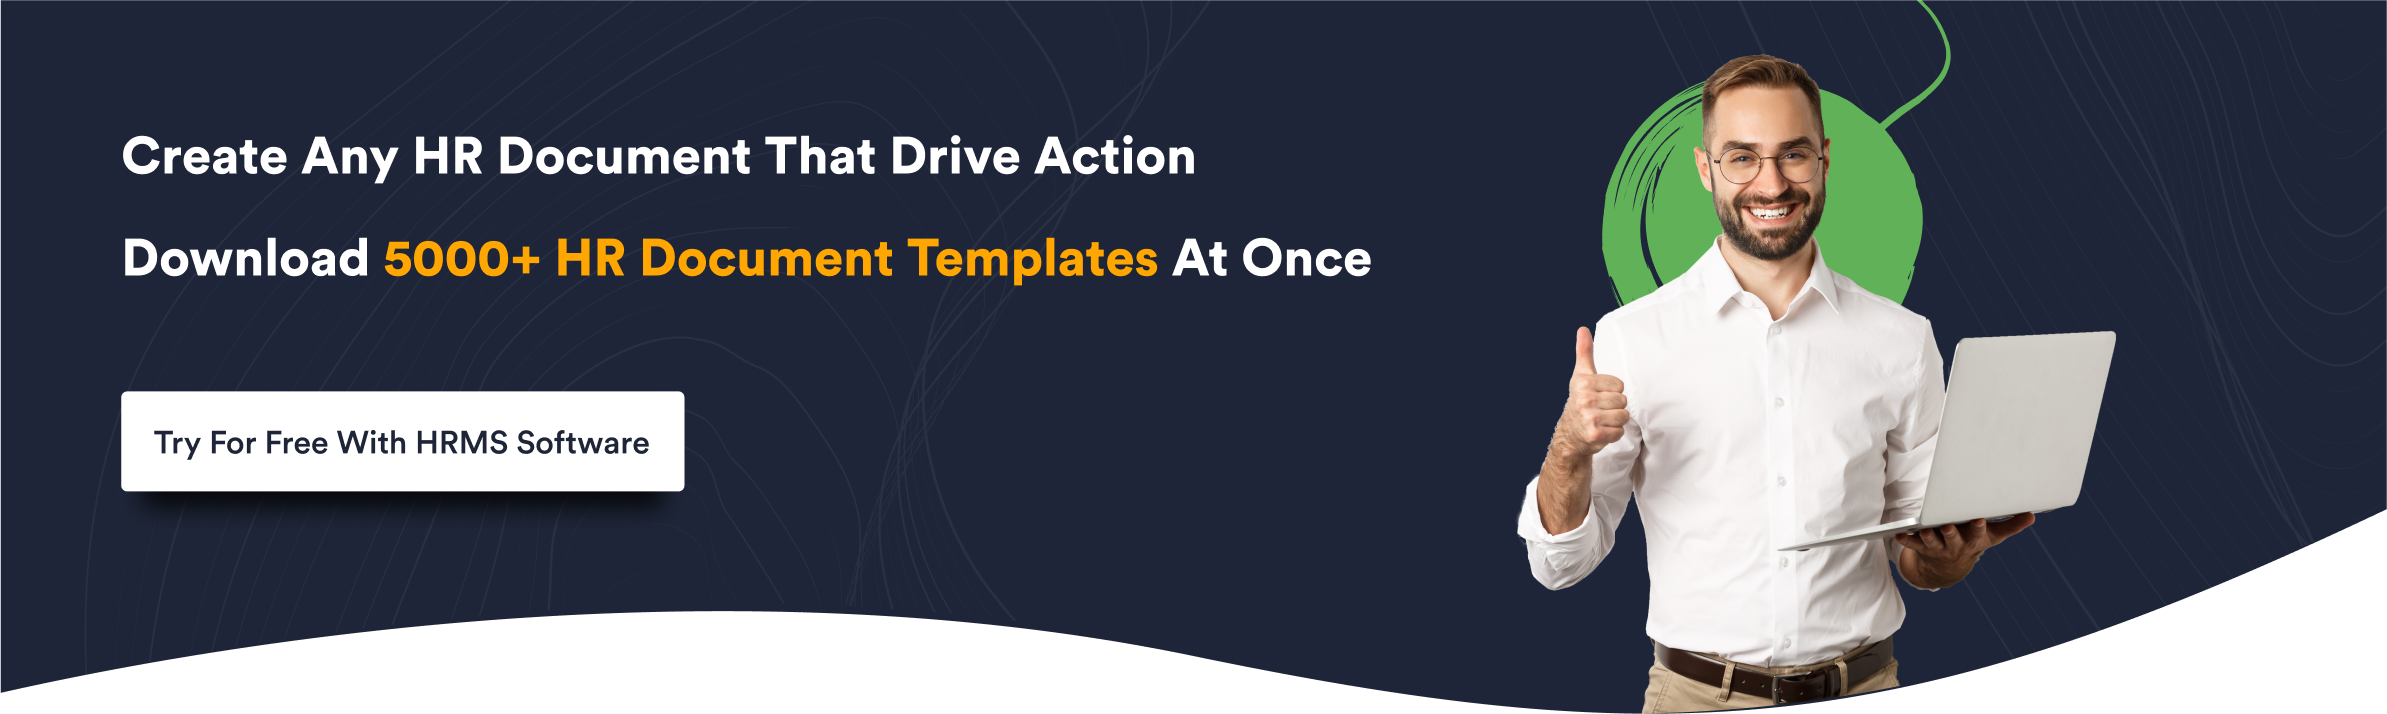 Create Any HR Document That Drive Action